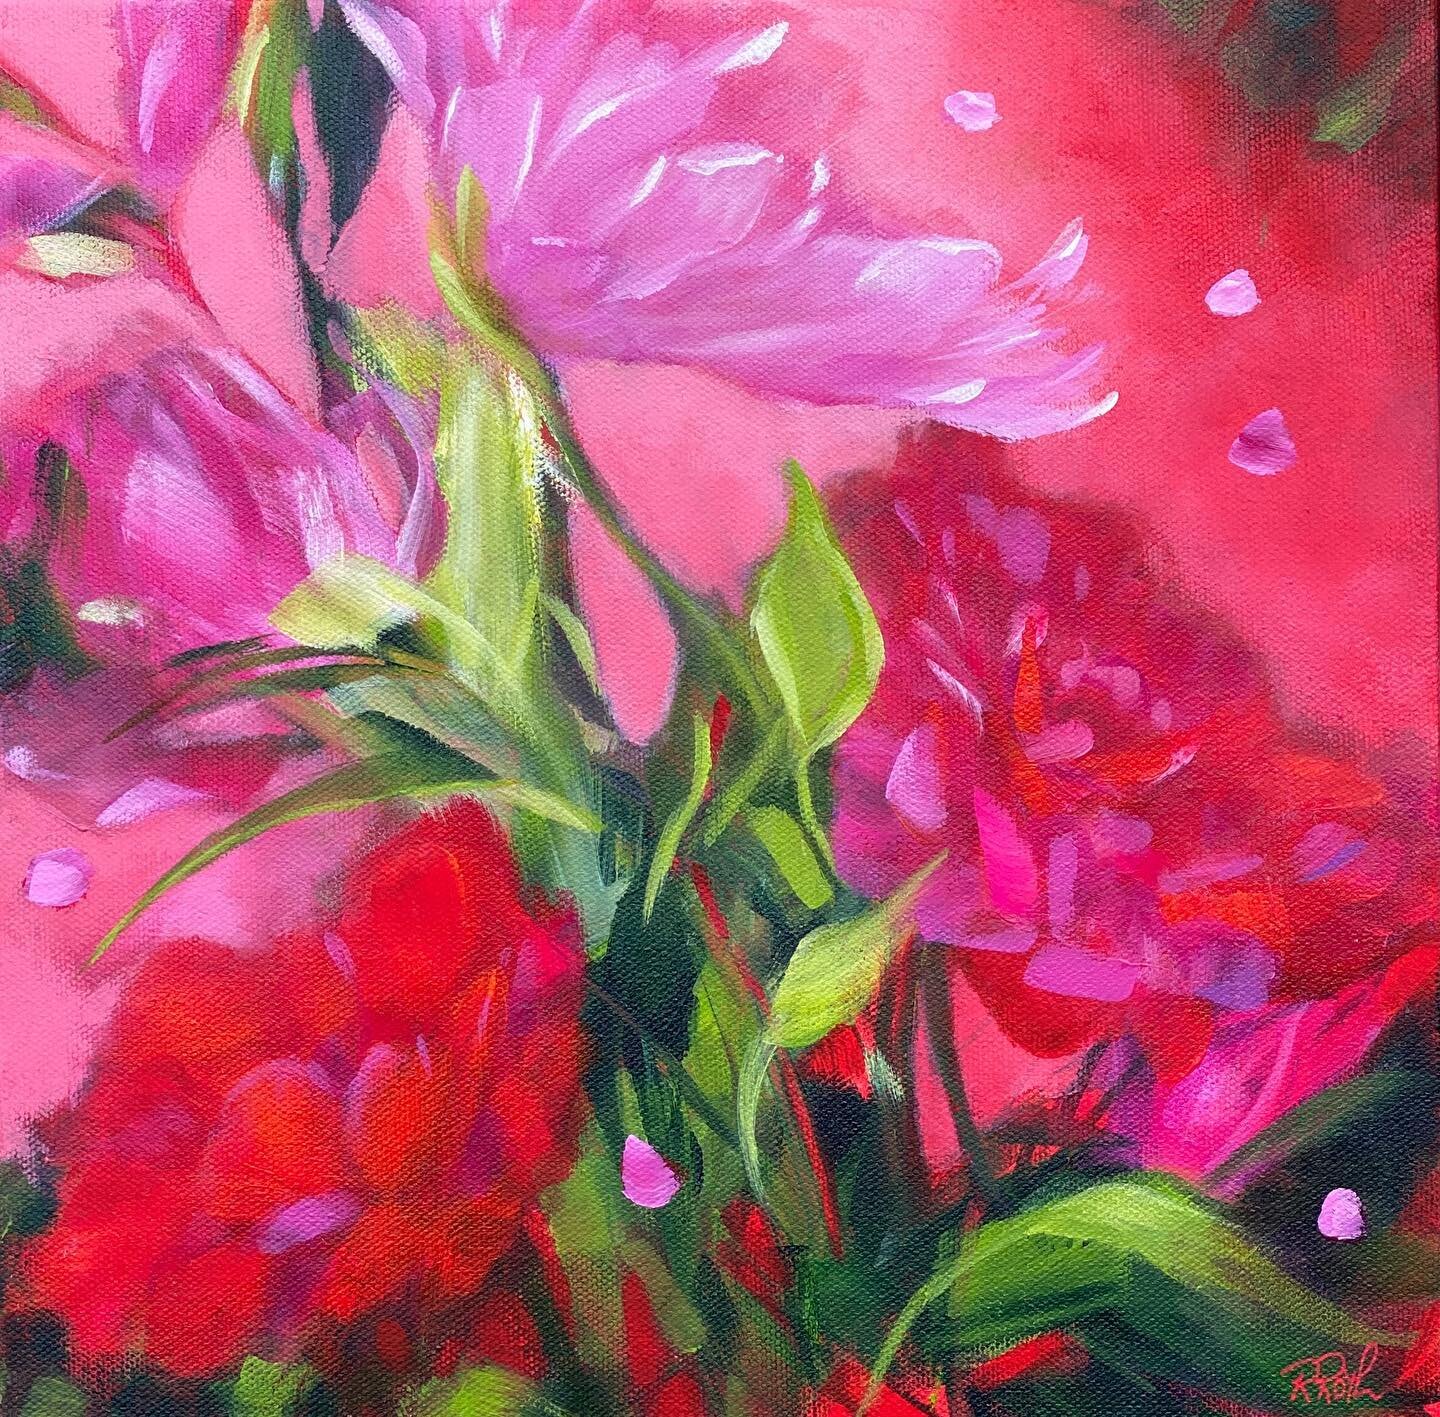 Are you like me and thinks pink pretty well goes with any colour?  Here&rsquo;s &ldquo;Scarlet Salsa&rdquo; with a touch of pink, available Aug 4th @squarefootshow. Swipe to see her all framed up for a little extra pizazz! 😊🌸

#onlineartsales #buya